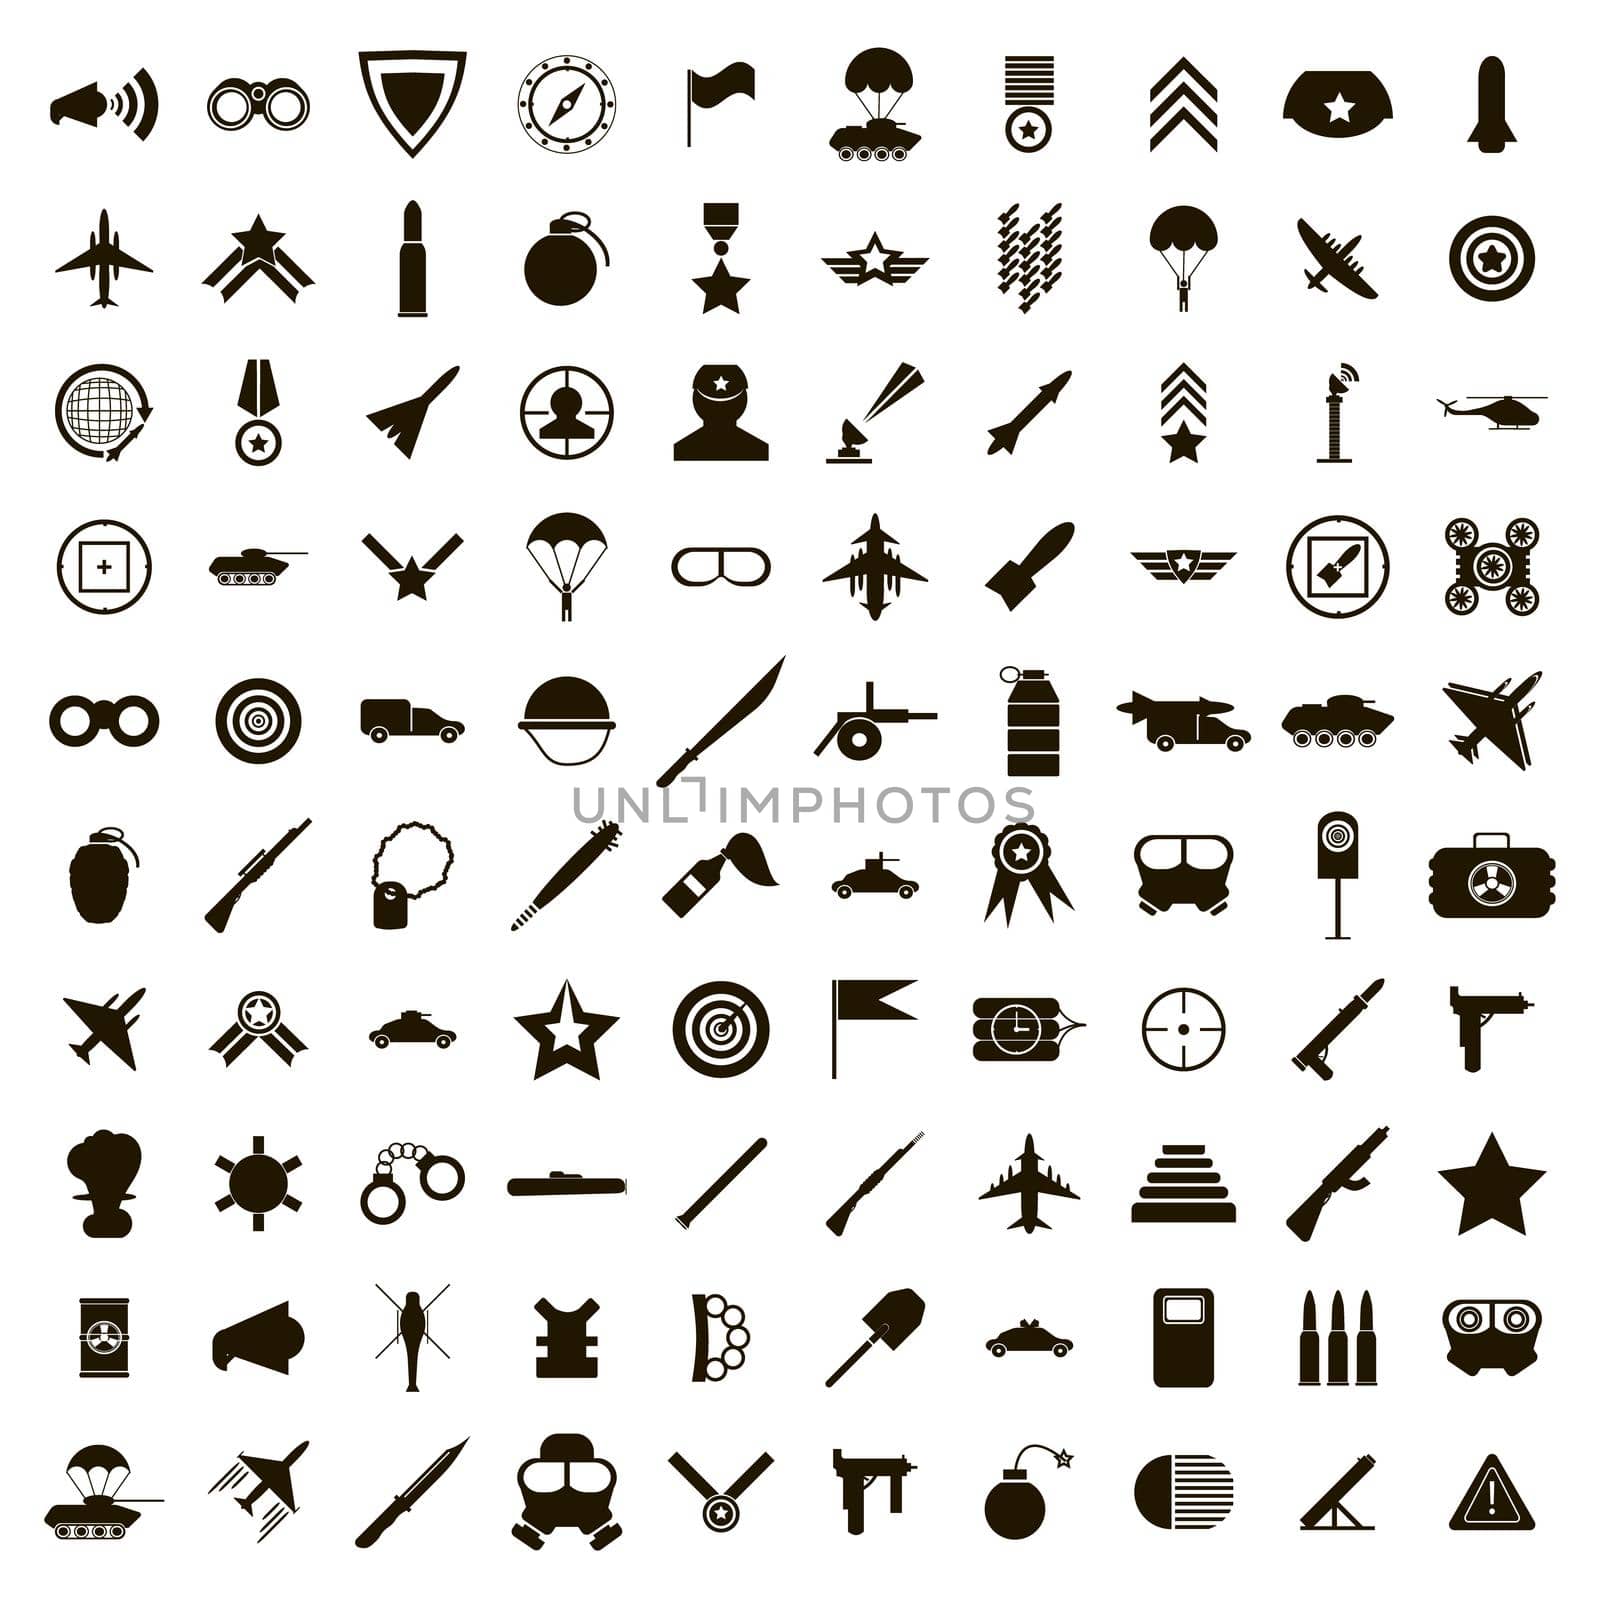 100 military icons set, simple style by ylivdesign